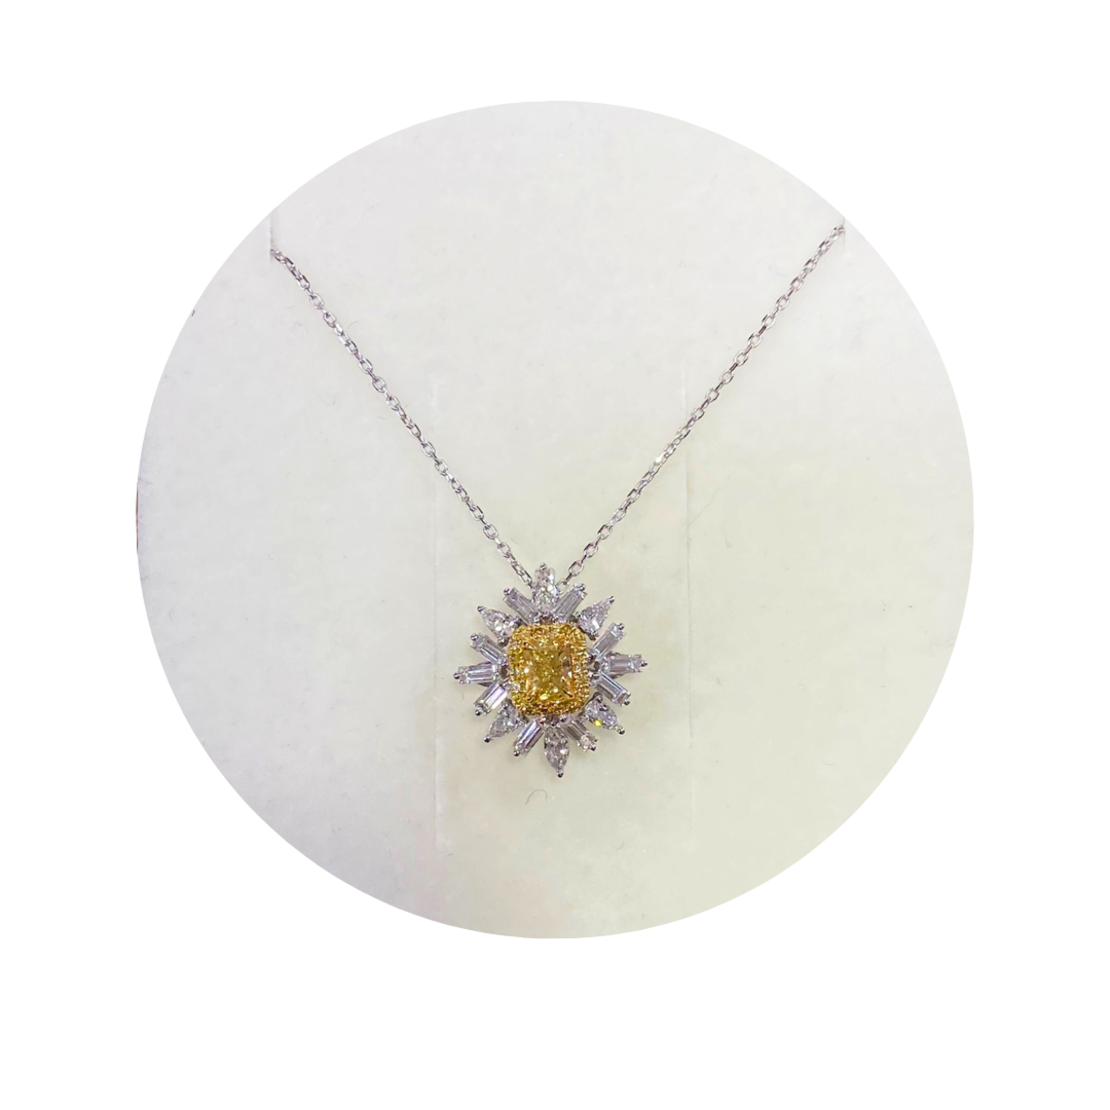 1.15 ct Yellow diamond ring and necklace